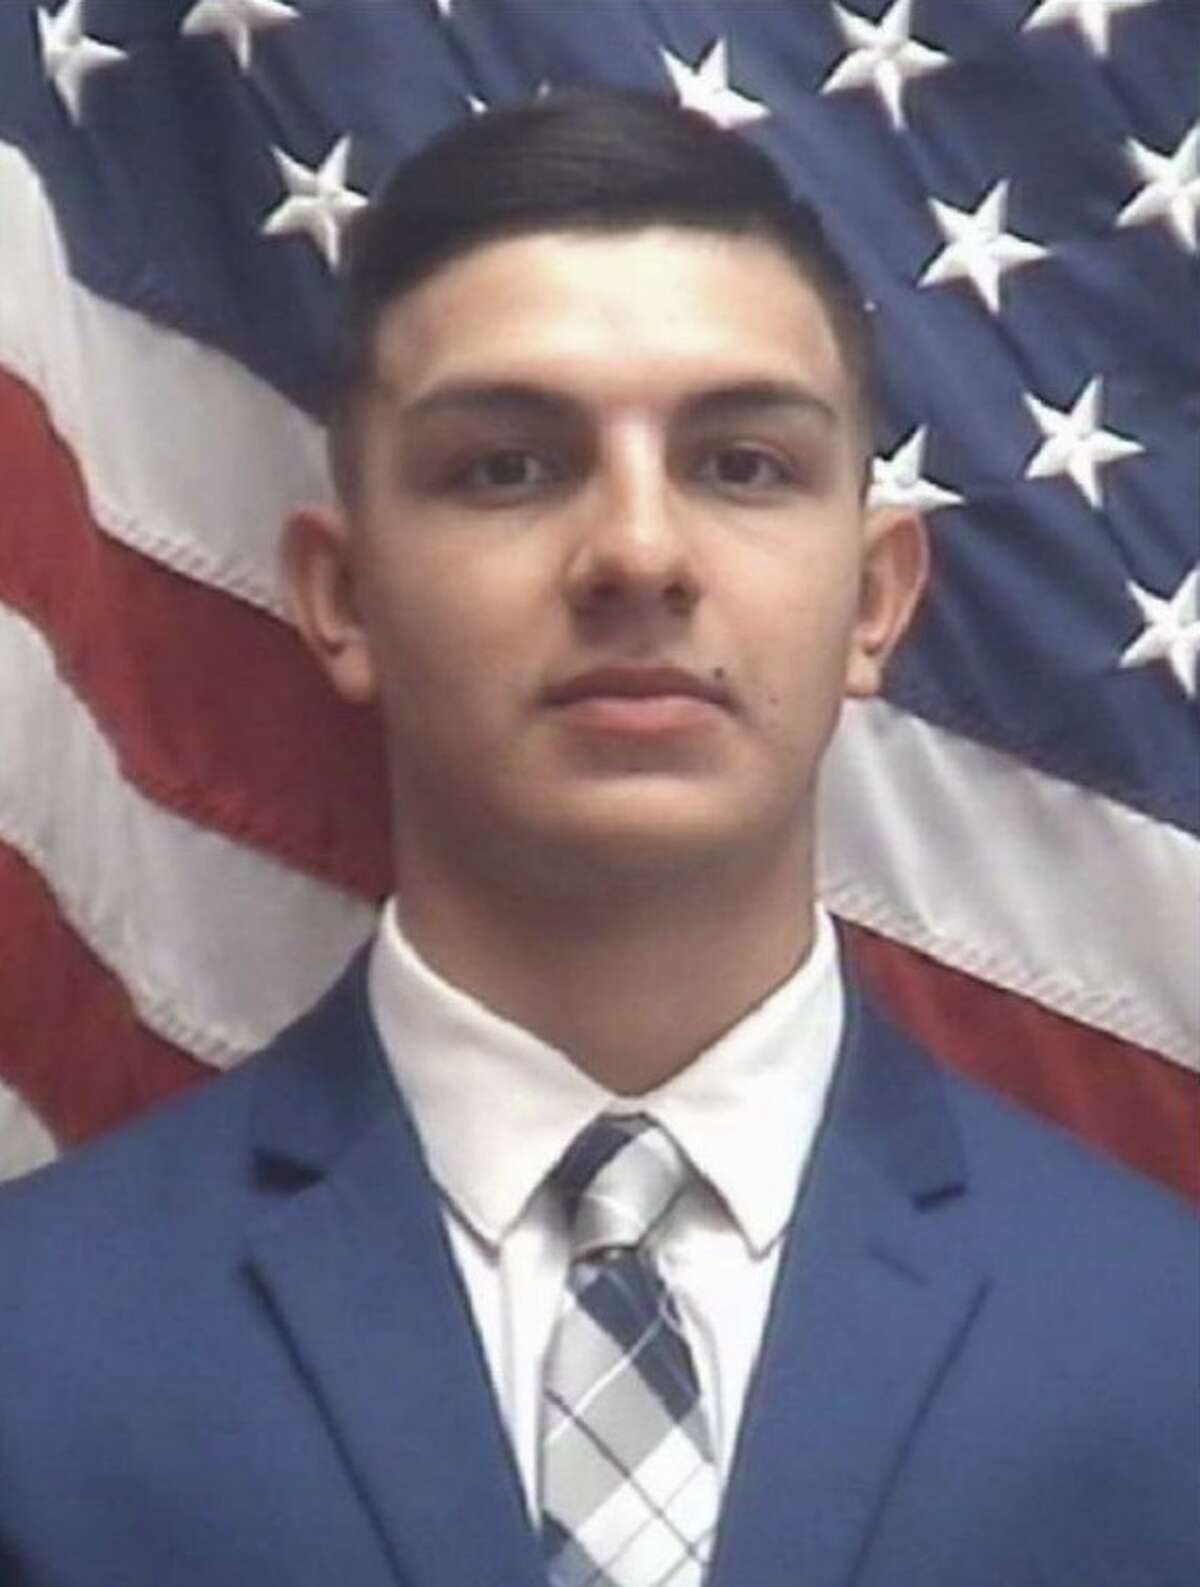 LPD stated that Officer Isai Cavazos was named the department's Crime Fighter of the Month for November 2022 due to his hard work and commitment to the department.